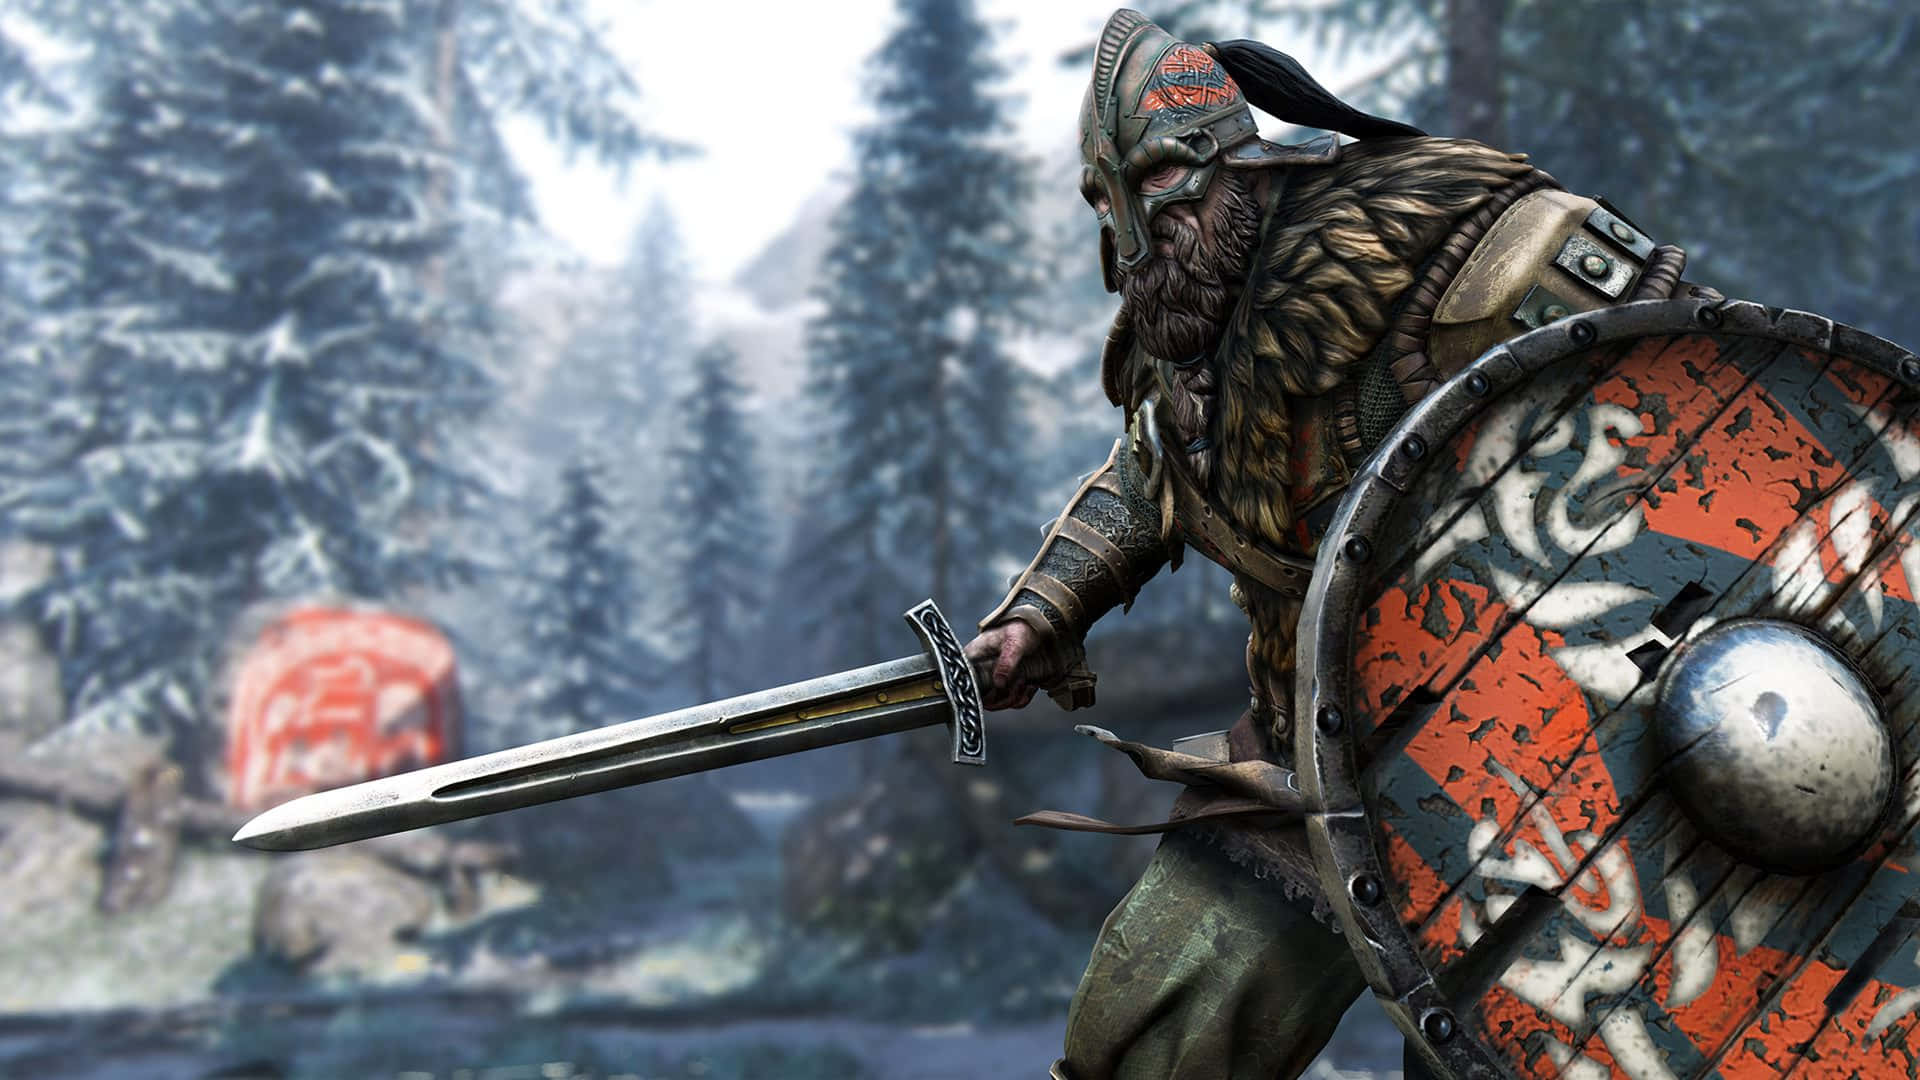 Epic Battle in For Honor's Game World